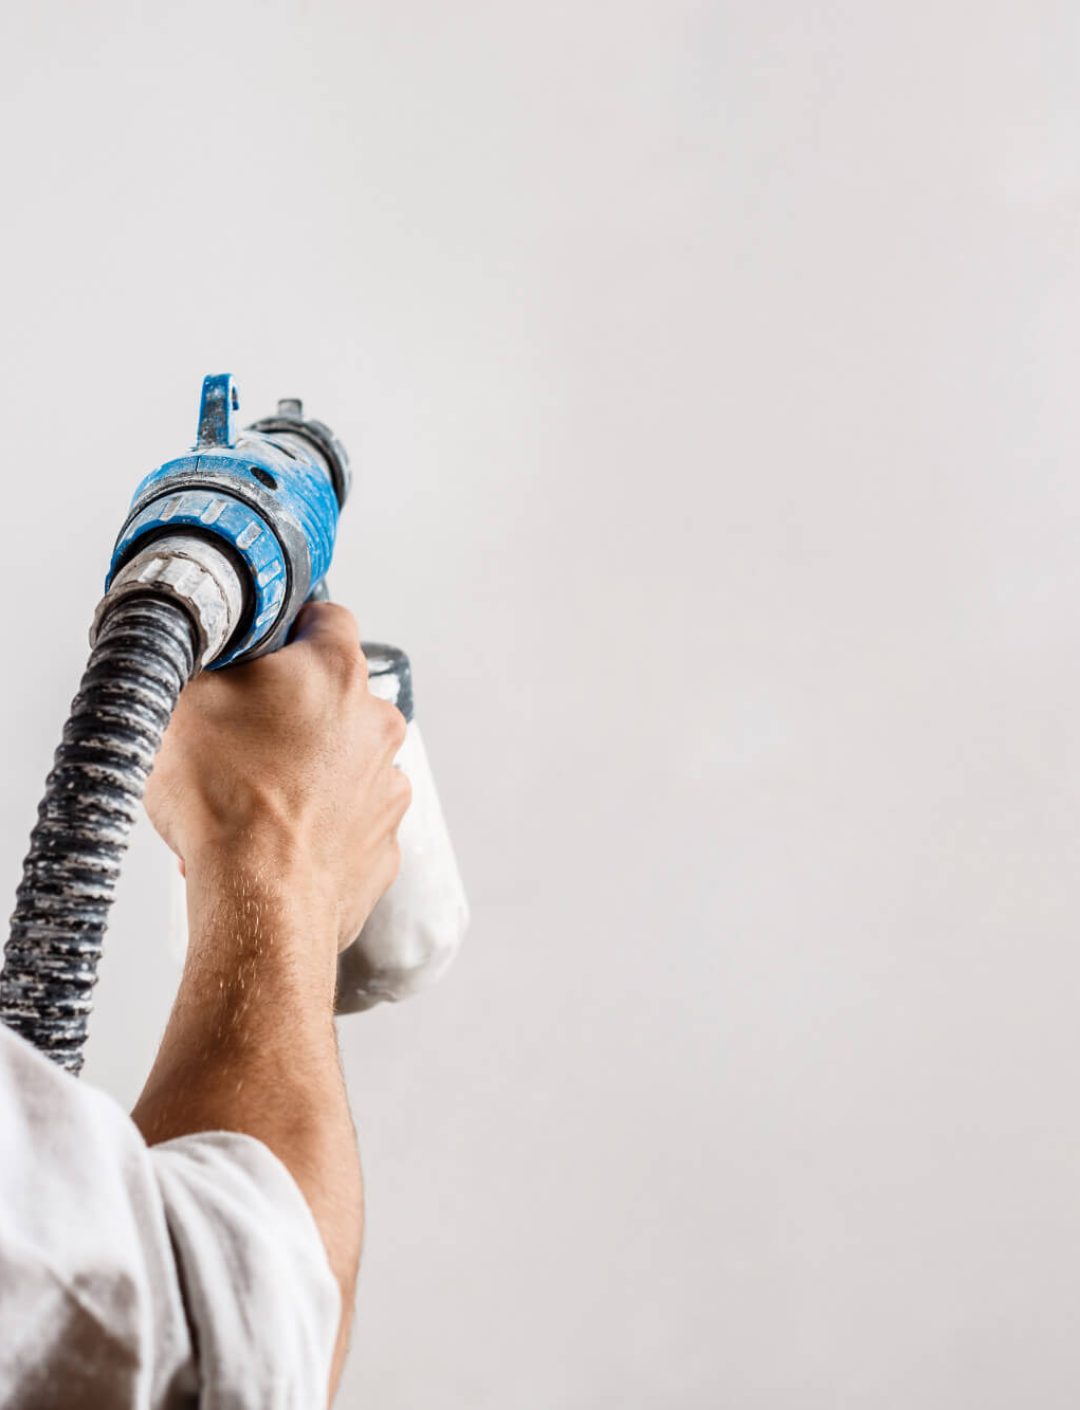 worker-painting-wall-with-spray-gun-white-color (1) (1)